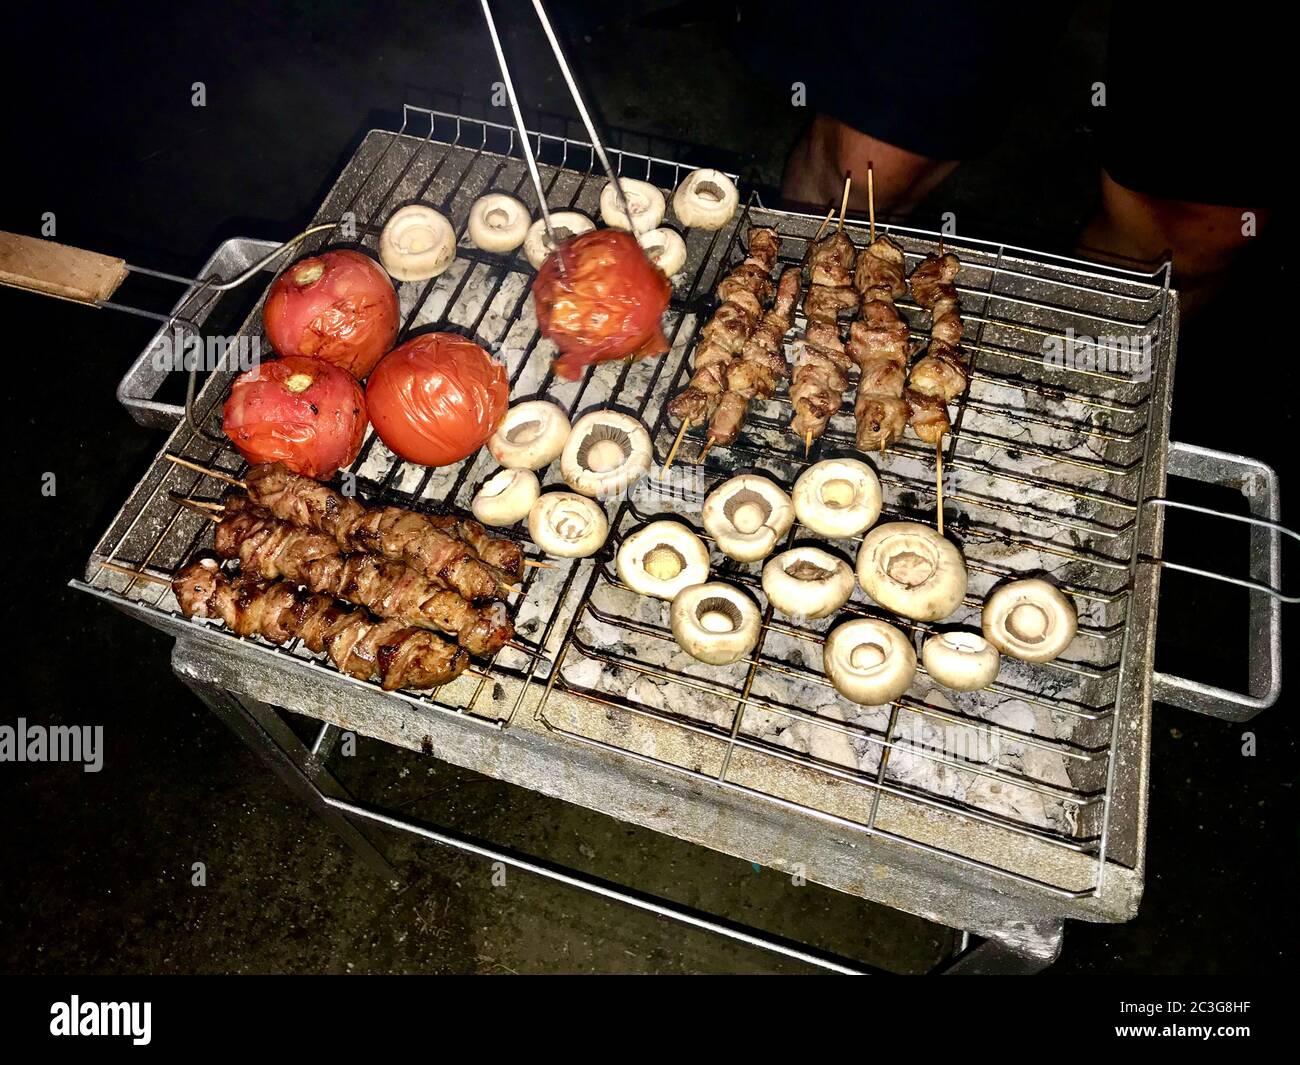 Turkish Style Lamb Kebab Shish Skewer Cooked with Mushrooms and Roasted Tomatoes on Street Barbecue Mangal. Traditional Cooking. Stock Photo